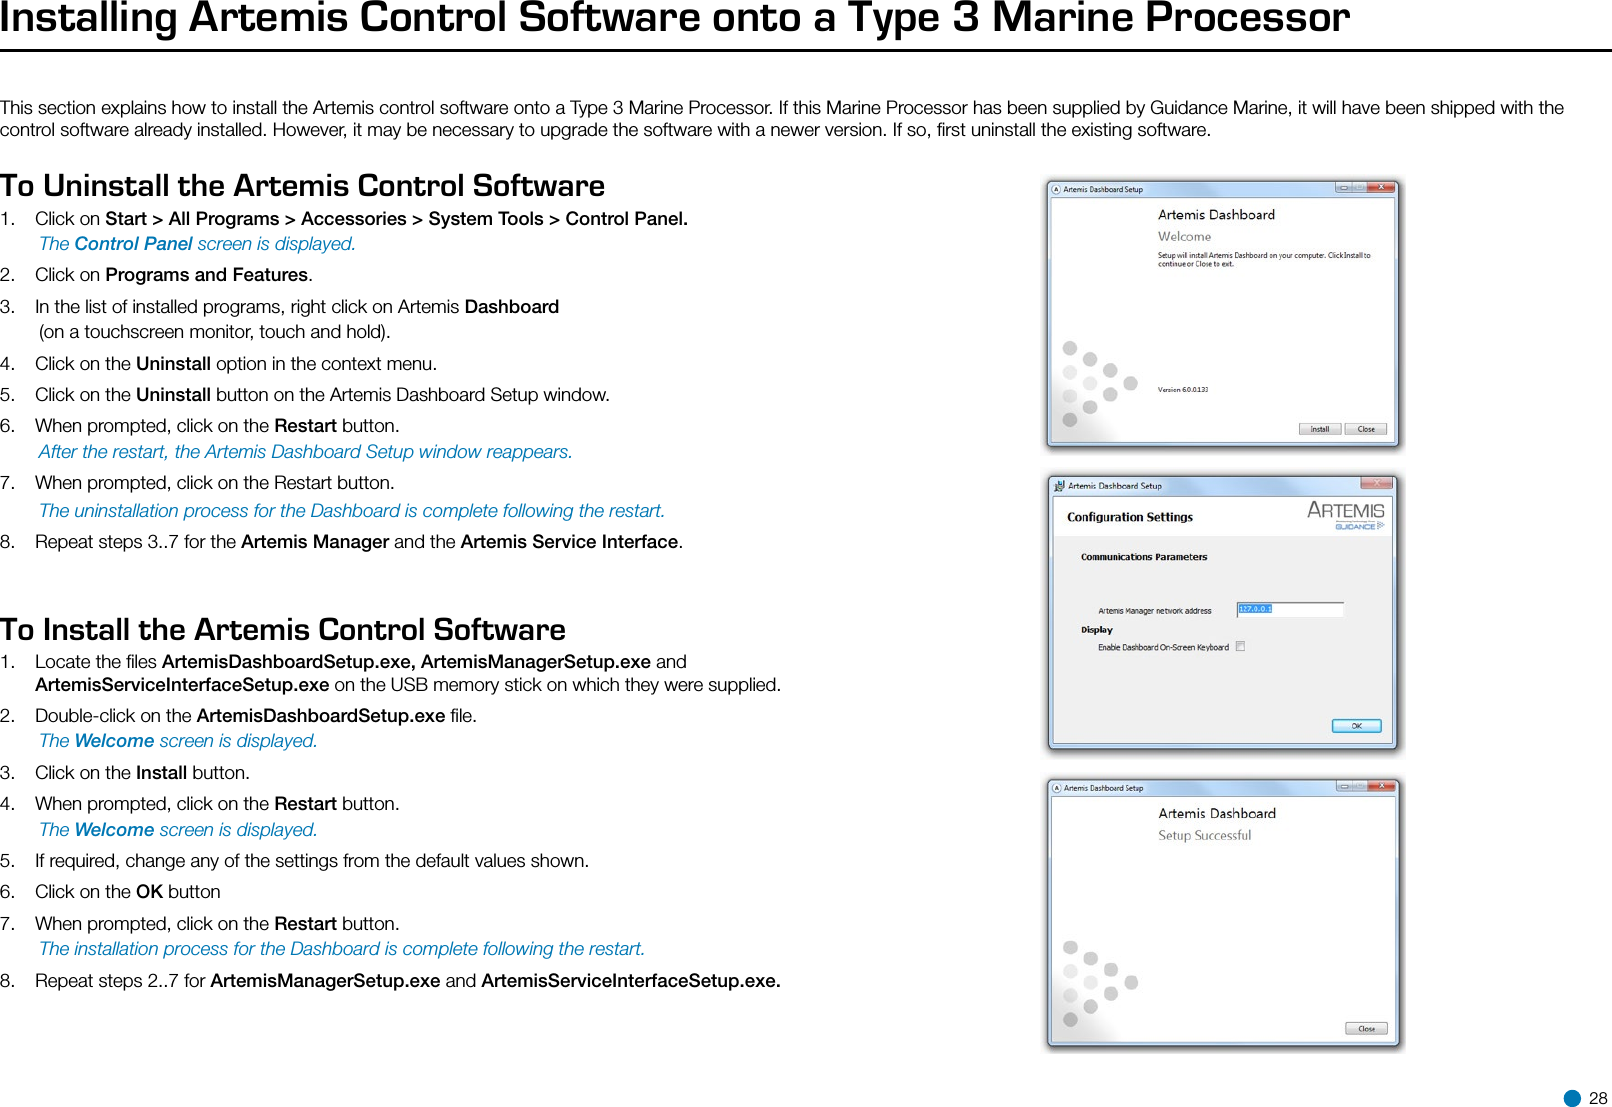 Installing Artemis Control Software onto a Type 3 Marine ProcessorThis section explains how to install the Artemis control software onto a Type 3 Marine Processor. If this Marine Processor has been supplied by Guidance Marine, it will have been shipped with the control software already installed. However, it may be necessary to upgrade the software with a newer version. If so, ﬁrst uninstall the existing software.To Uninstall the Artemis Control Software1.  Click on Start &gt; All Programs &gt; Accessories &gt; System Tools &gt; Control Panel. The Control Panel screen is displayed.2.  Click on Programs and Features.3.  In the list of installed programs, right click on Artemis Dashboard   (on a touchscreen monitor, touch and hold).4.  Click on the Uninstall option in the context menu.5.  Click on the Uninstall button on the Artemis Dashboard Setup window.6.  When prompted, click on the Restart button.  After the restart, the Artemis Dashboard Setup window reappears.7.  When prompted, click on the Restart button.  The uninstallation process for the Dashboard is complete following the restart.8.  Repeat steps 3..7 for the Artemis Manager and the Artemis Service Interface.To Install the Artemis Control Software1.  Locate the ﬁles ArtemisDashboardSetup.exe, ArtemisManagerSetup.exe and ArtemisServiceInterfaceSetup.exe on the USB memory stick on which they were supplied.2.   Double-click on the ArtemisDashboardSetup.exe ﬁle. The Welcome screen is displayed.3.  Click on the Install button.4.  When prompted, click on the Restart button. The Welcome screen is displayed.5.  If required, change any of the settings from the default values shown.6.  Click on the OK button7.  When prompted, click on the Restart button. The installation process for the Dashboard is complete following the restart.8.  Repeat steps 2..7 for ArtemisManagerSetup.exe and ArtemisServiceInterfaceSetup.exe. 28